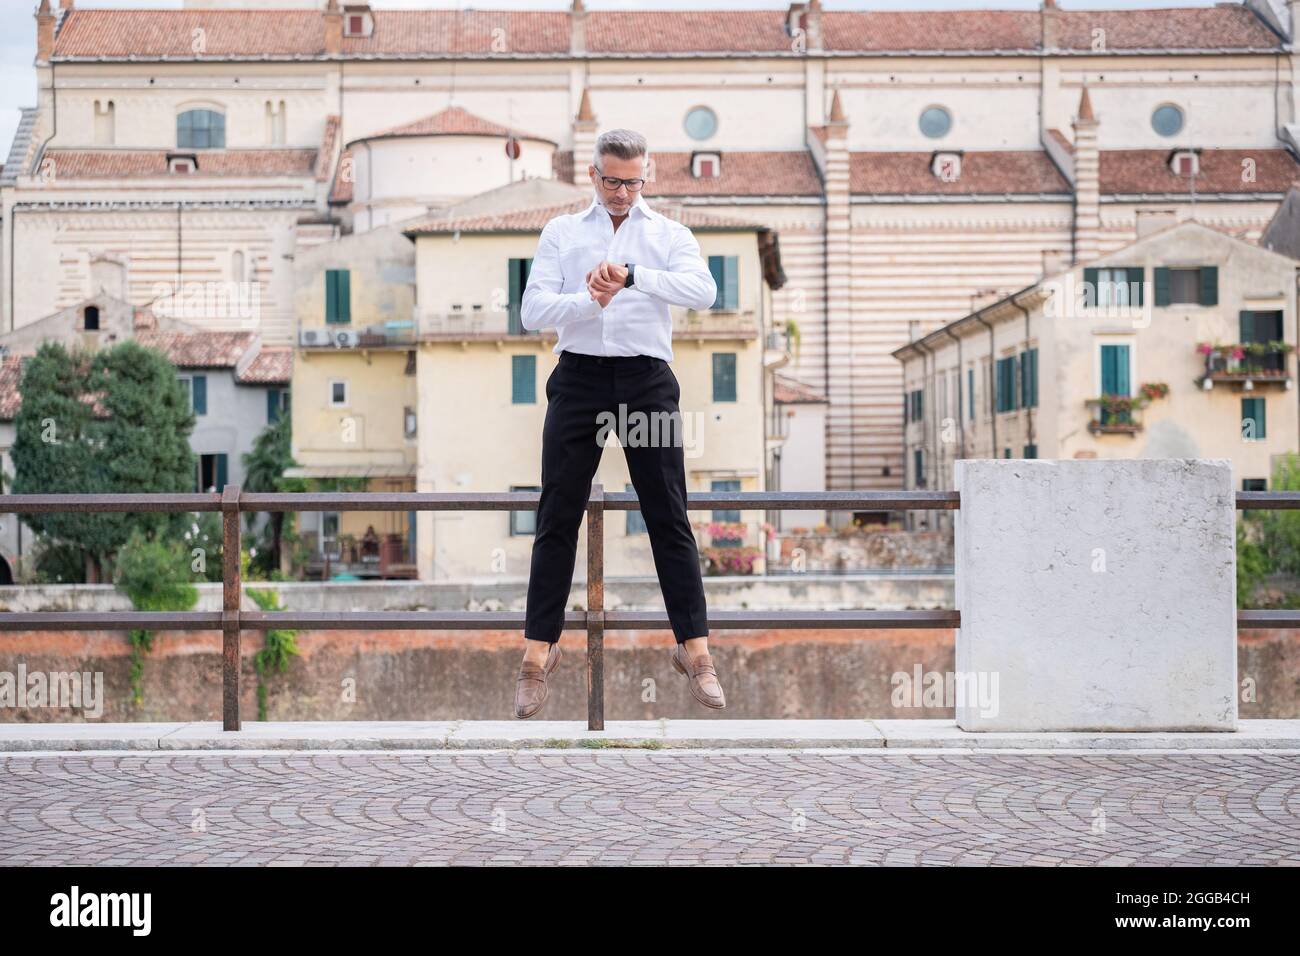 Handsome businessman checking the time on his watch and jumping from stationary. Strange and surreal situation Stock Photo